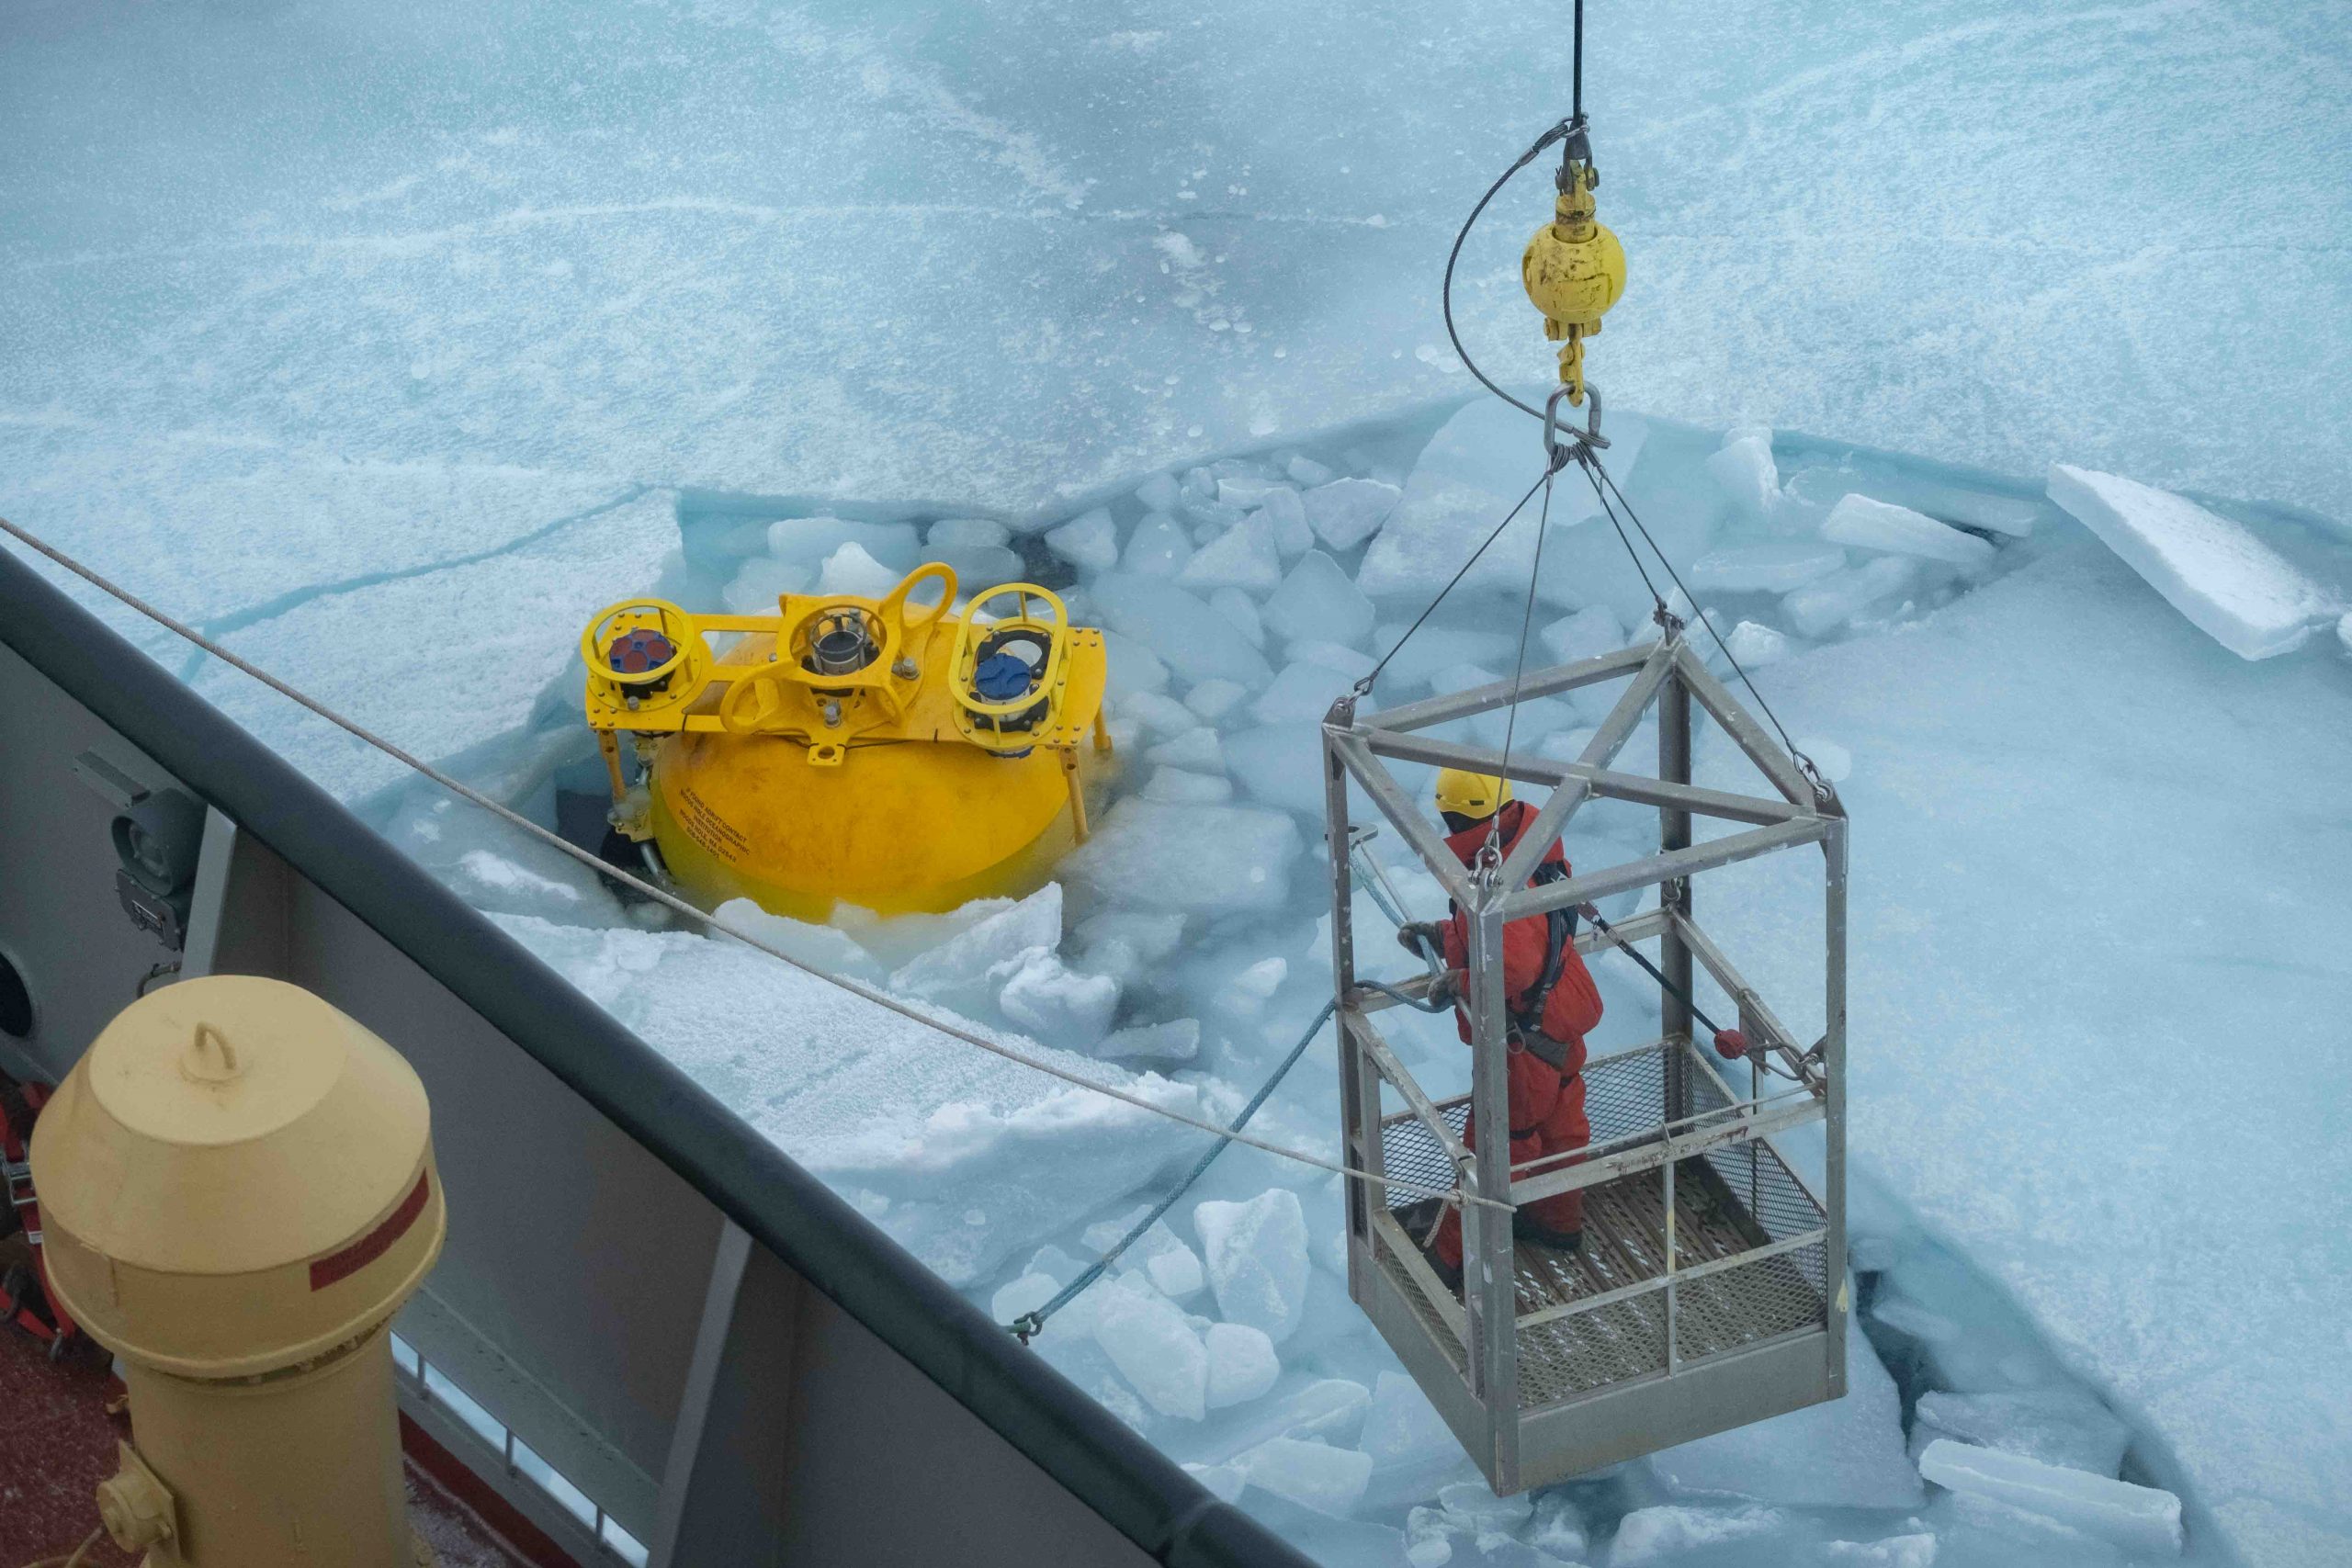 Deckhand Steve Keats in the man cage, floating over the ice to hook the surface sphere to the crane so that the mooring can begin its recovery (Photo by Elizabeth Bailey).